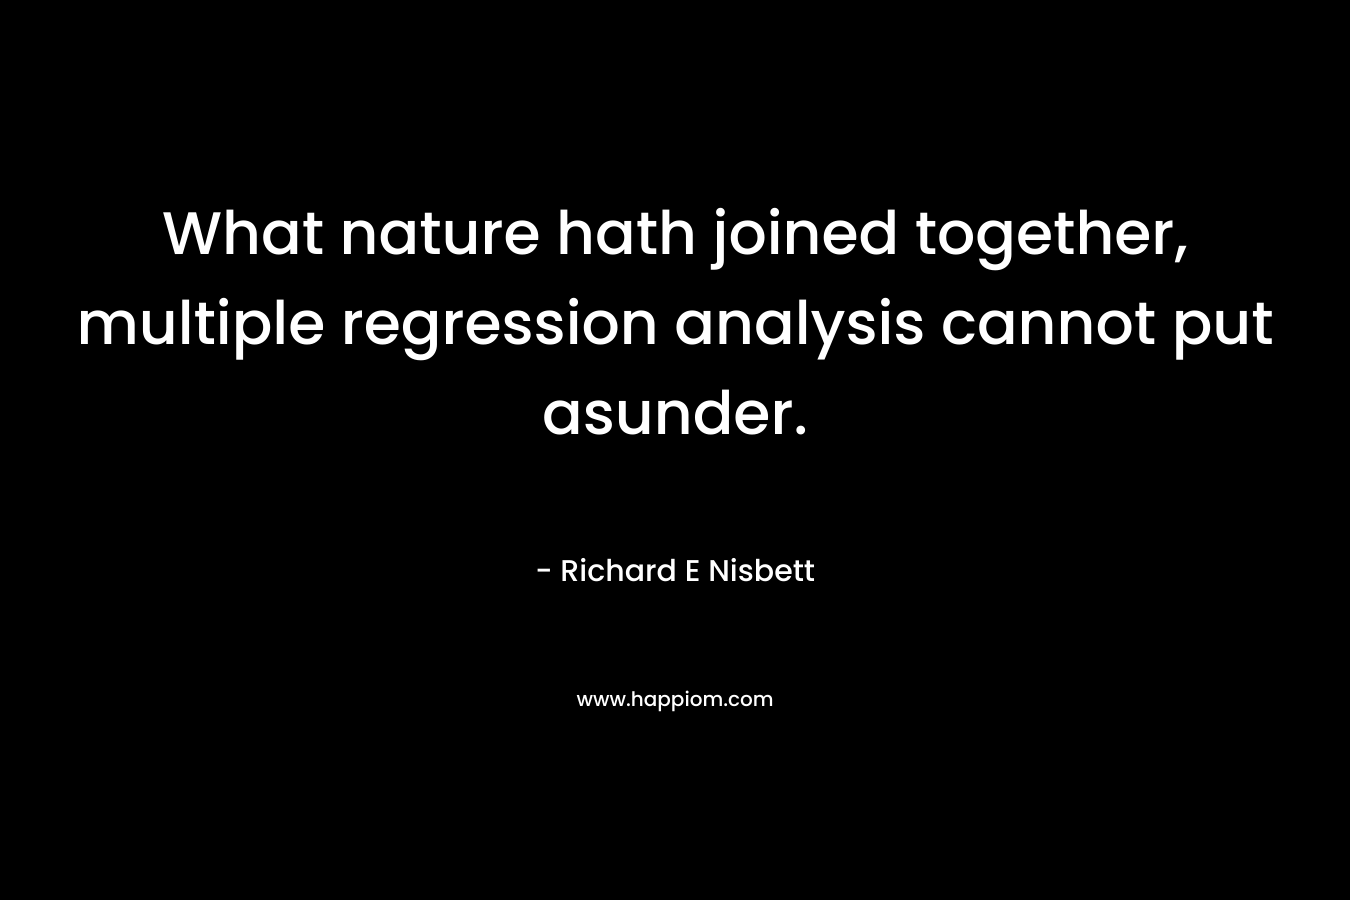 What nature hath joined together, multiple regression analysis cannot put asunder.